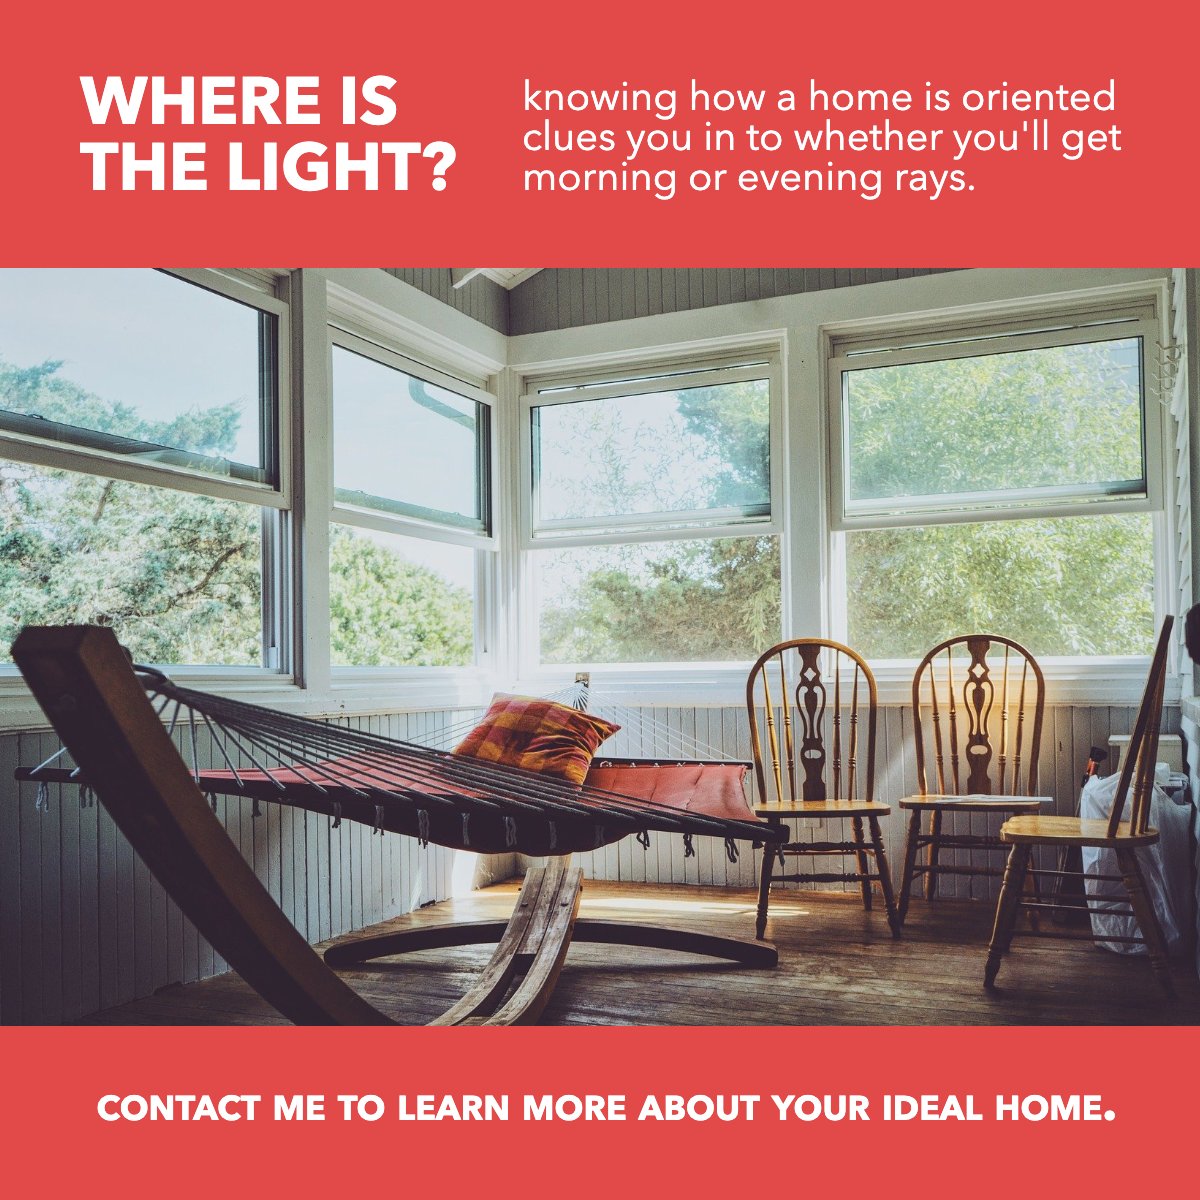 Where is the light? 🤔

Knowing how a home is oriented, clues you in to whether you'll get morning or evening rays. ☀️

#sunlight #housegoals #morninglight #eveninglight
 #AmericasMortgageSolutions #christianpenner #onestopbrokershop #mortgagebrokerwestpalmbeach